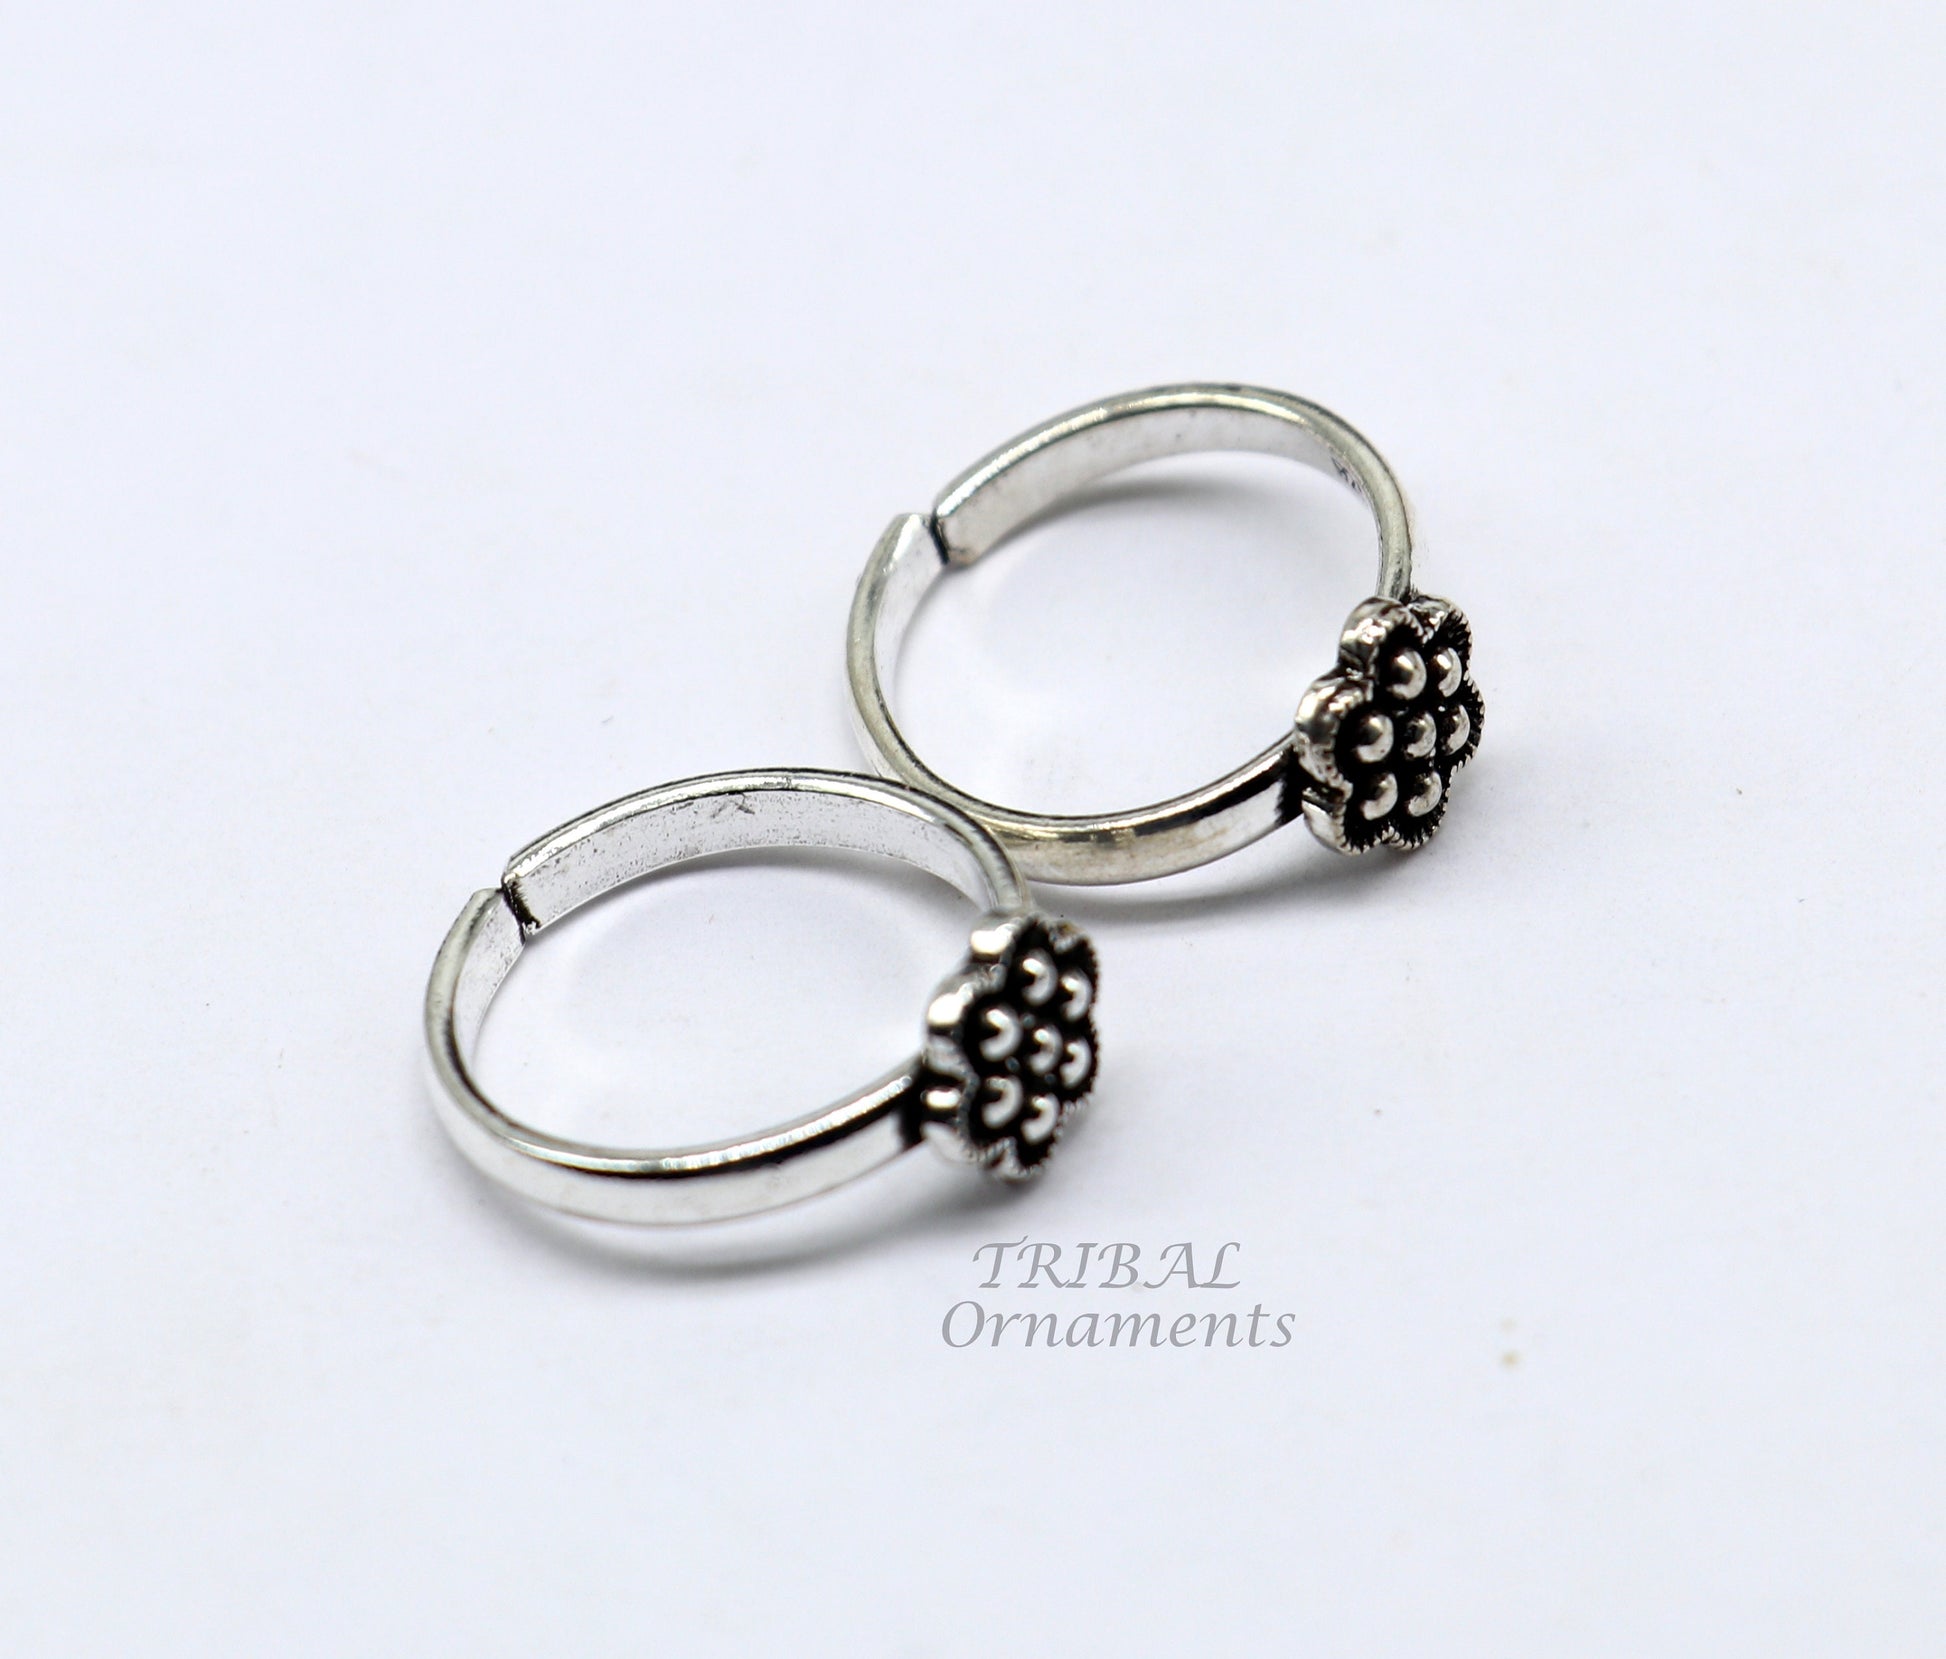 Floral design vintage style handmade 925 sterling silver adjustable toe ring band for brides or girl's best personalized jewelry ytr77 - TRIBAL ORNAMENTS